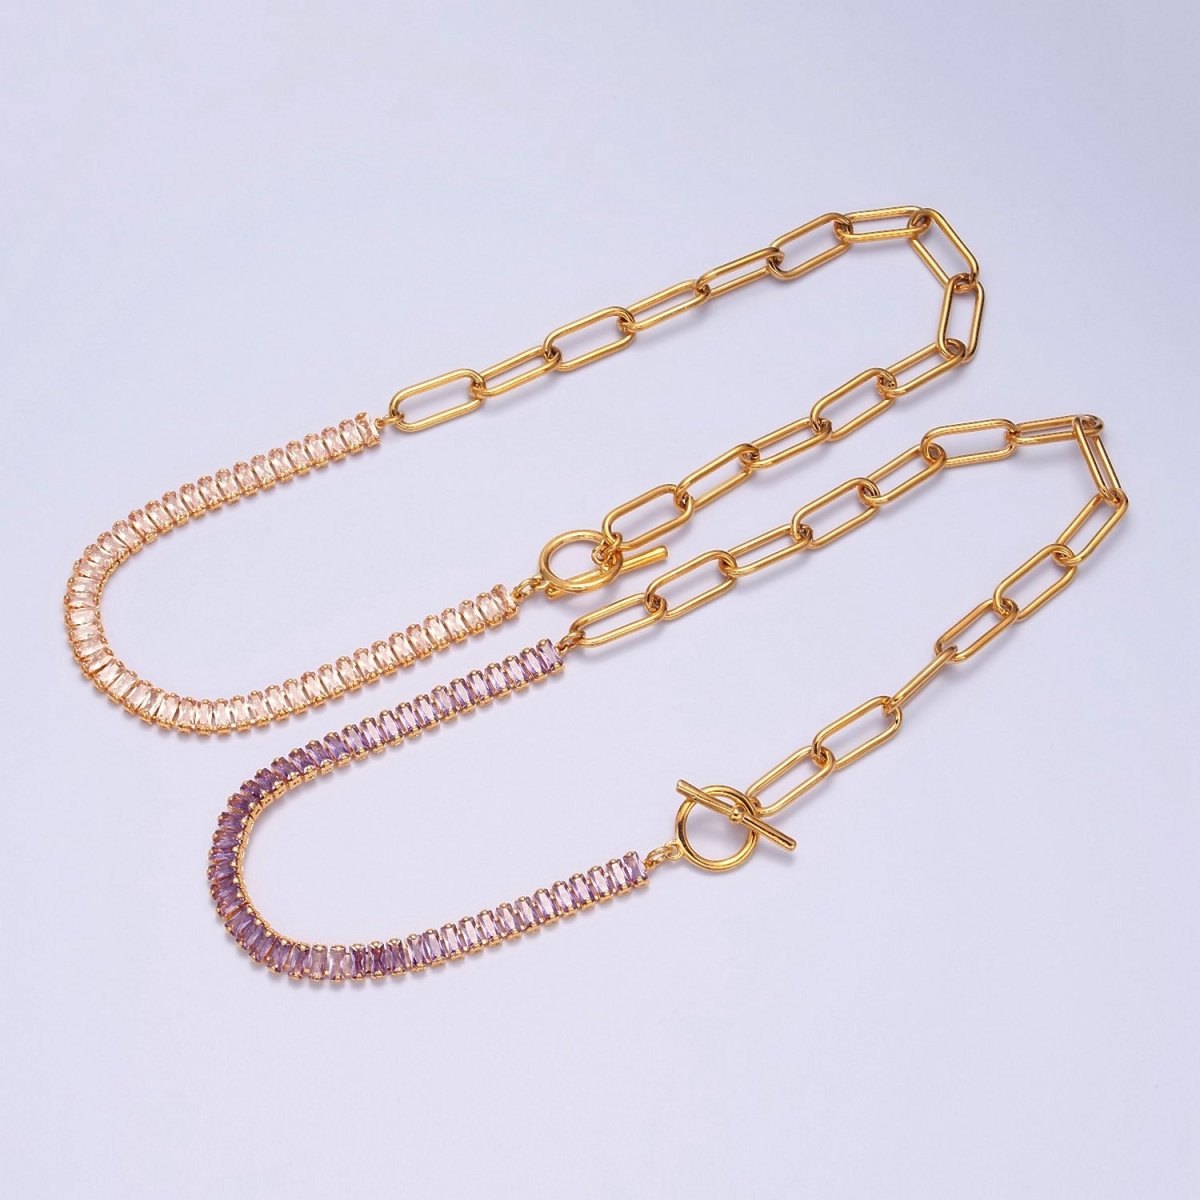 Minimalist Tennis Baguette Necklace 24k gold Filled CZ paperclip chain necklace, large link tennis chain | WA-947 WA-948 Clearance Pricing - DLUXCA